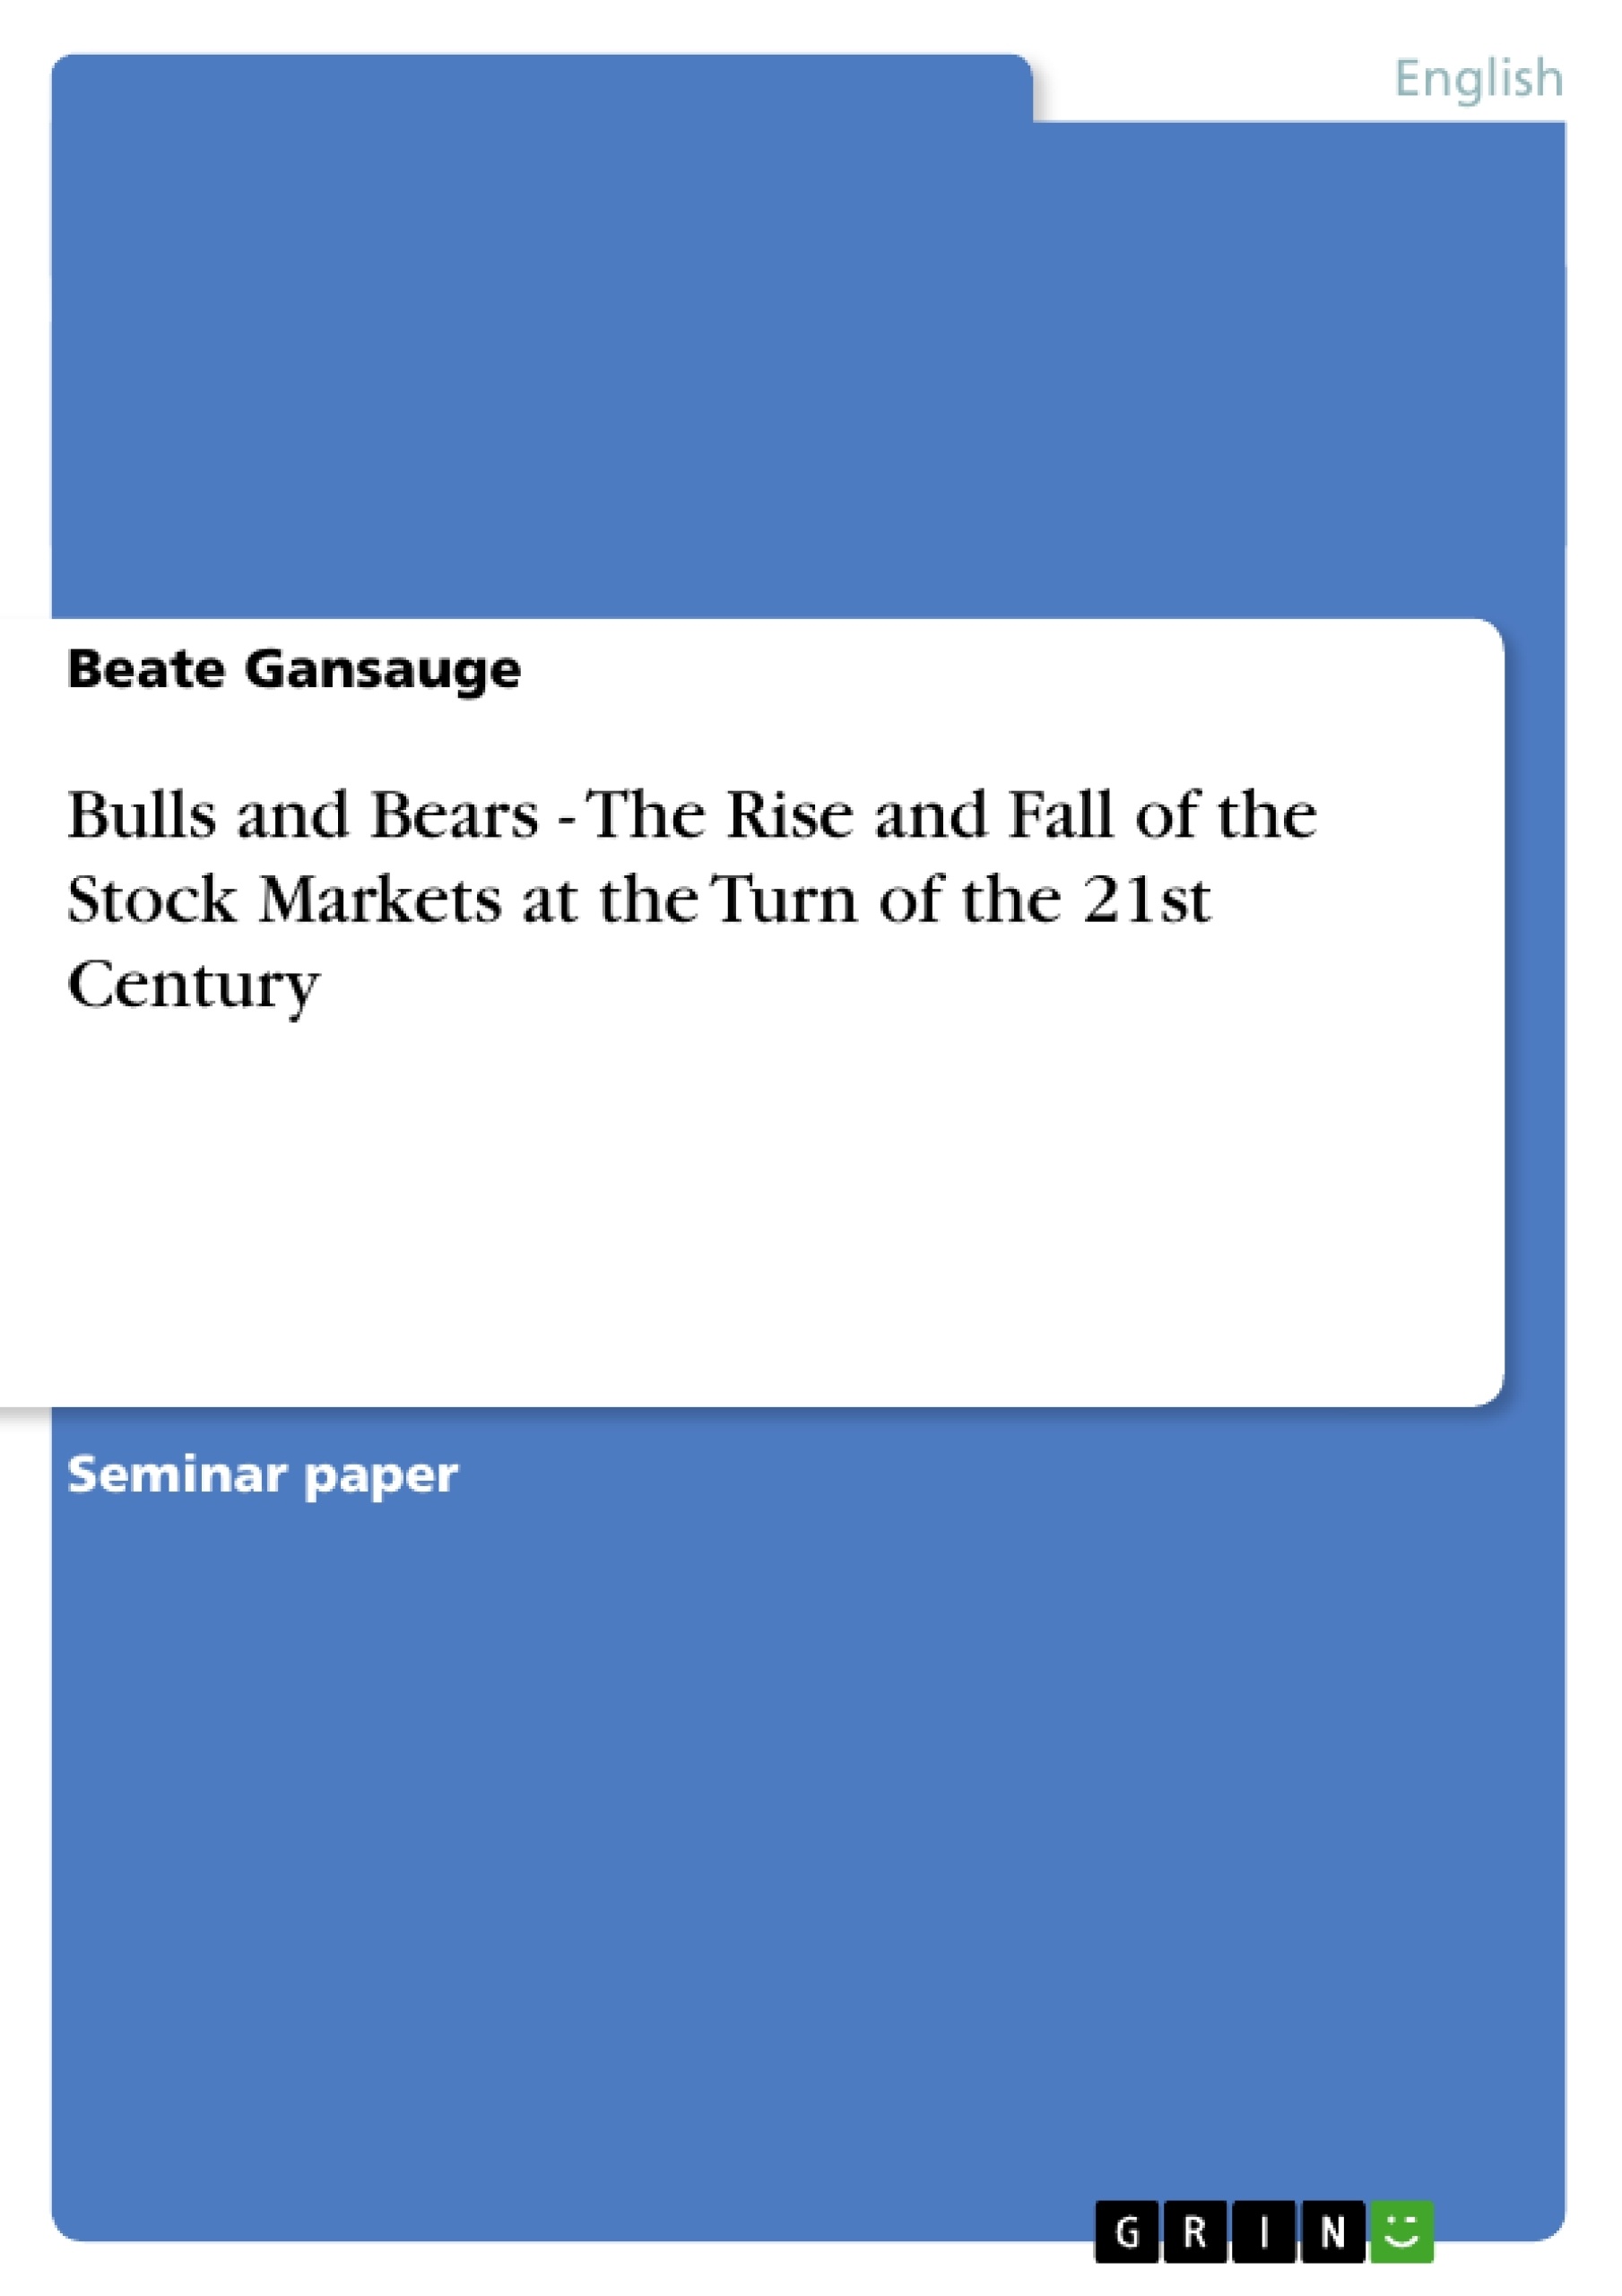 Title: Bulls and Bears - The Rise and Fall of the Stock Markets at the Turn of the 21st Century